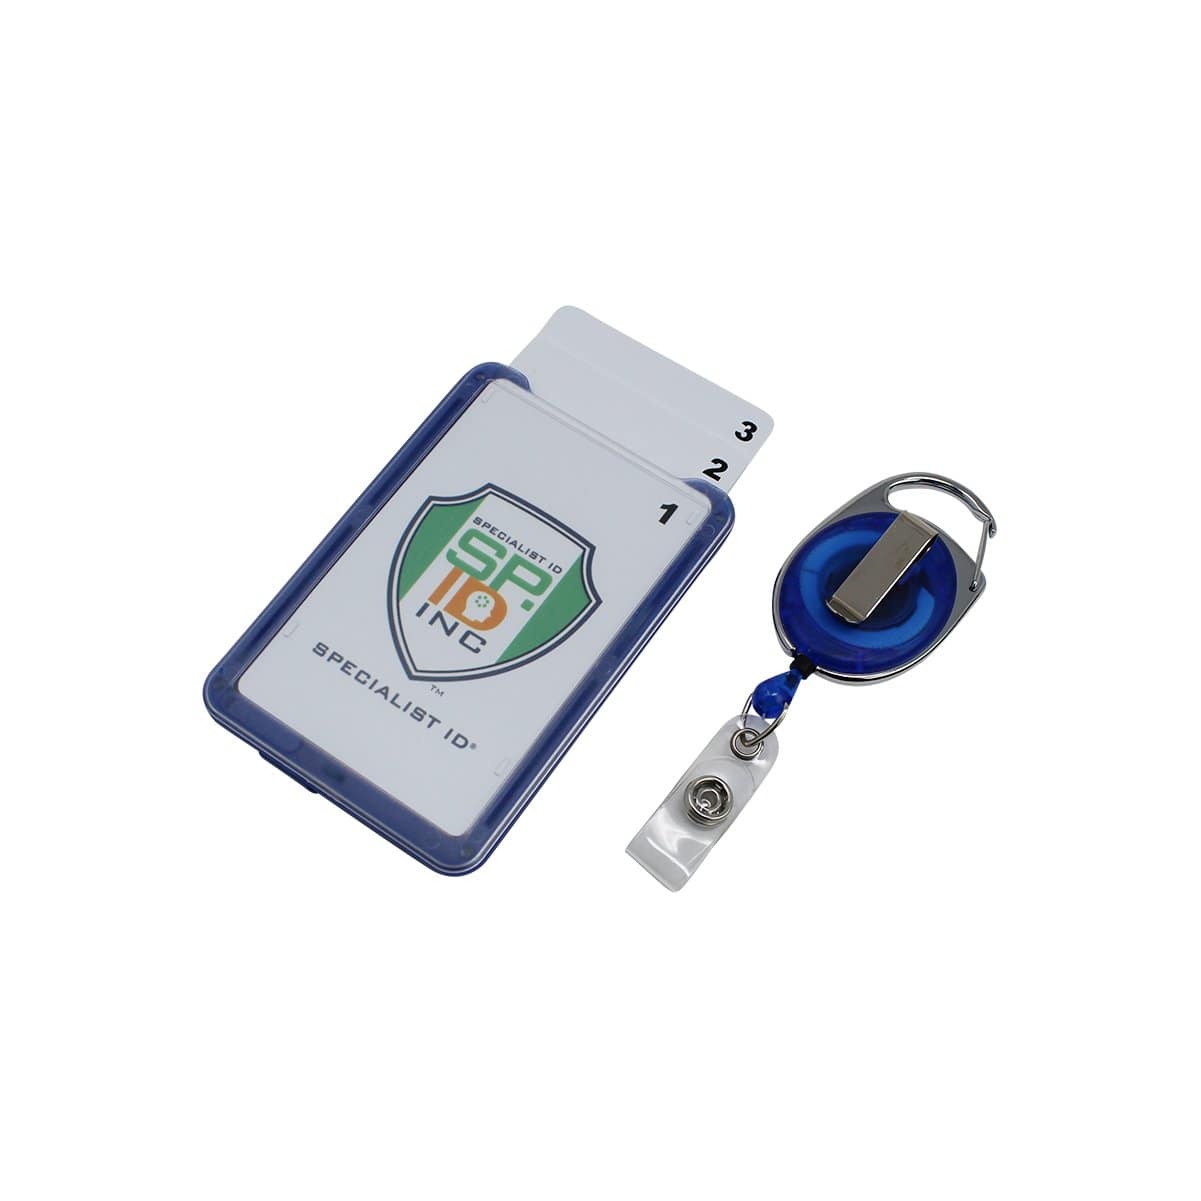 Specialist ID Hard Plastic 3 Card Badge Holder with Retractable Reel - Retracting ID Lanyard Features Belt Clip & Carabiner - Rigid Vertical CAC Hold